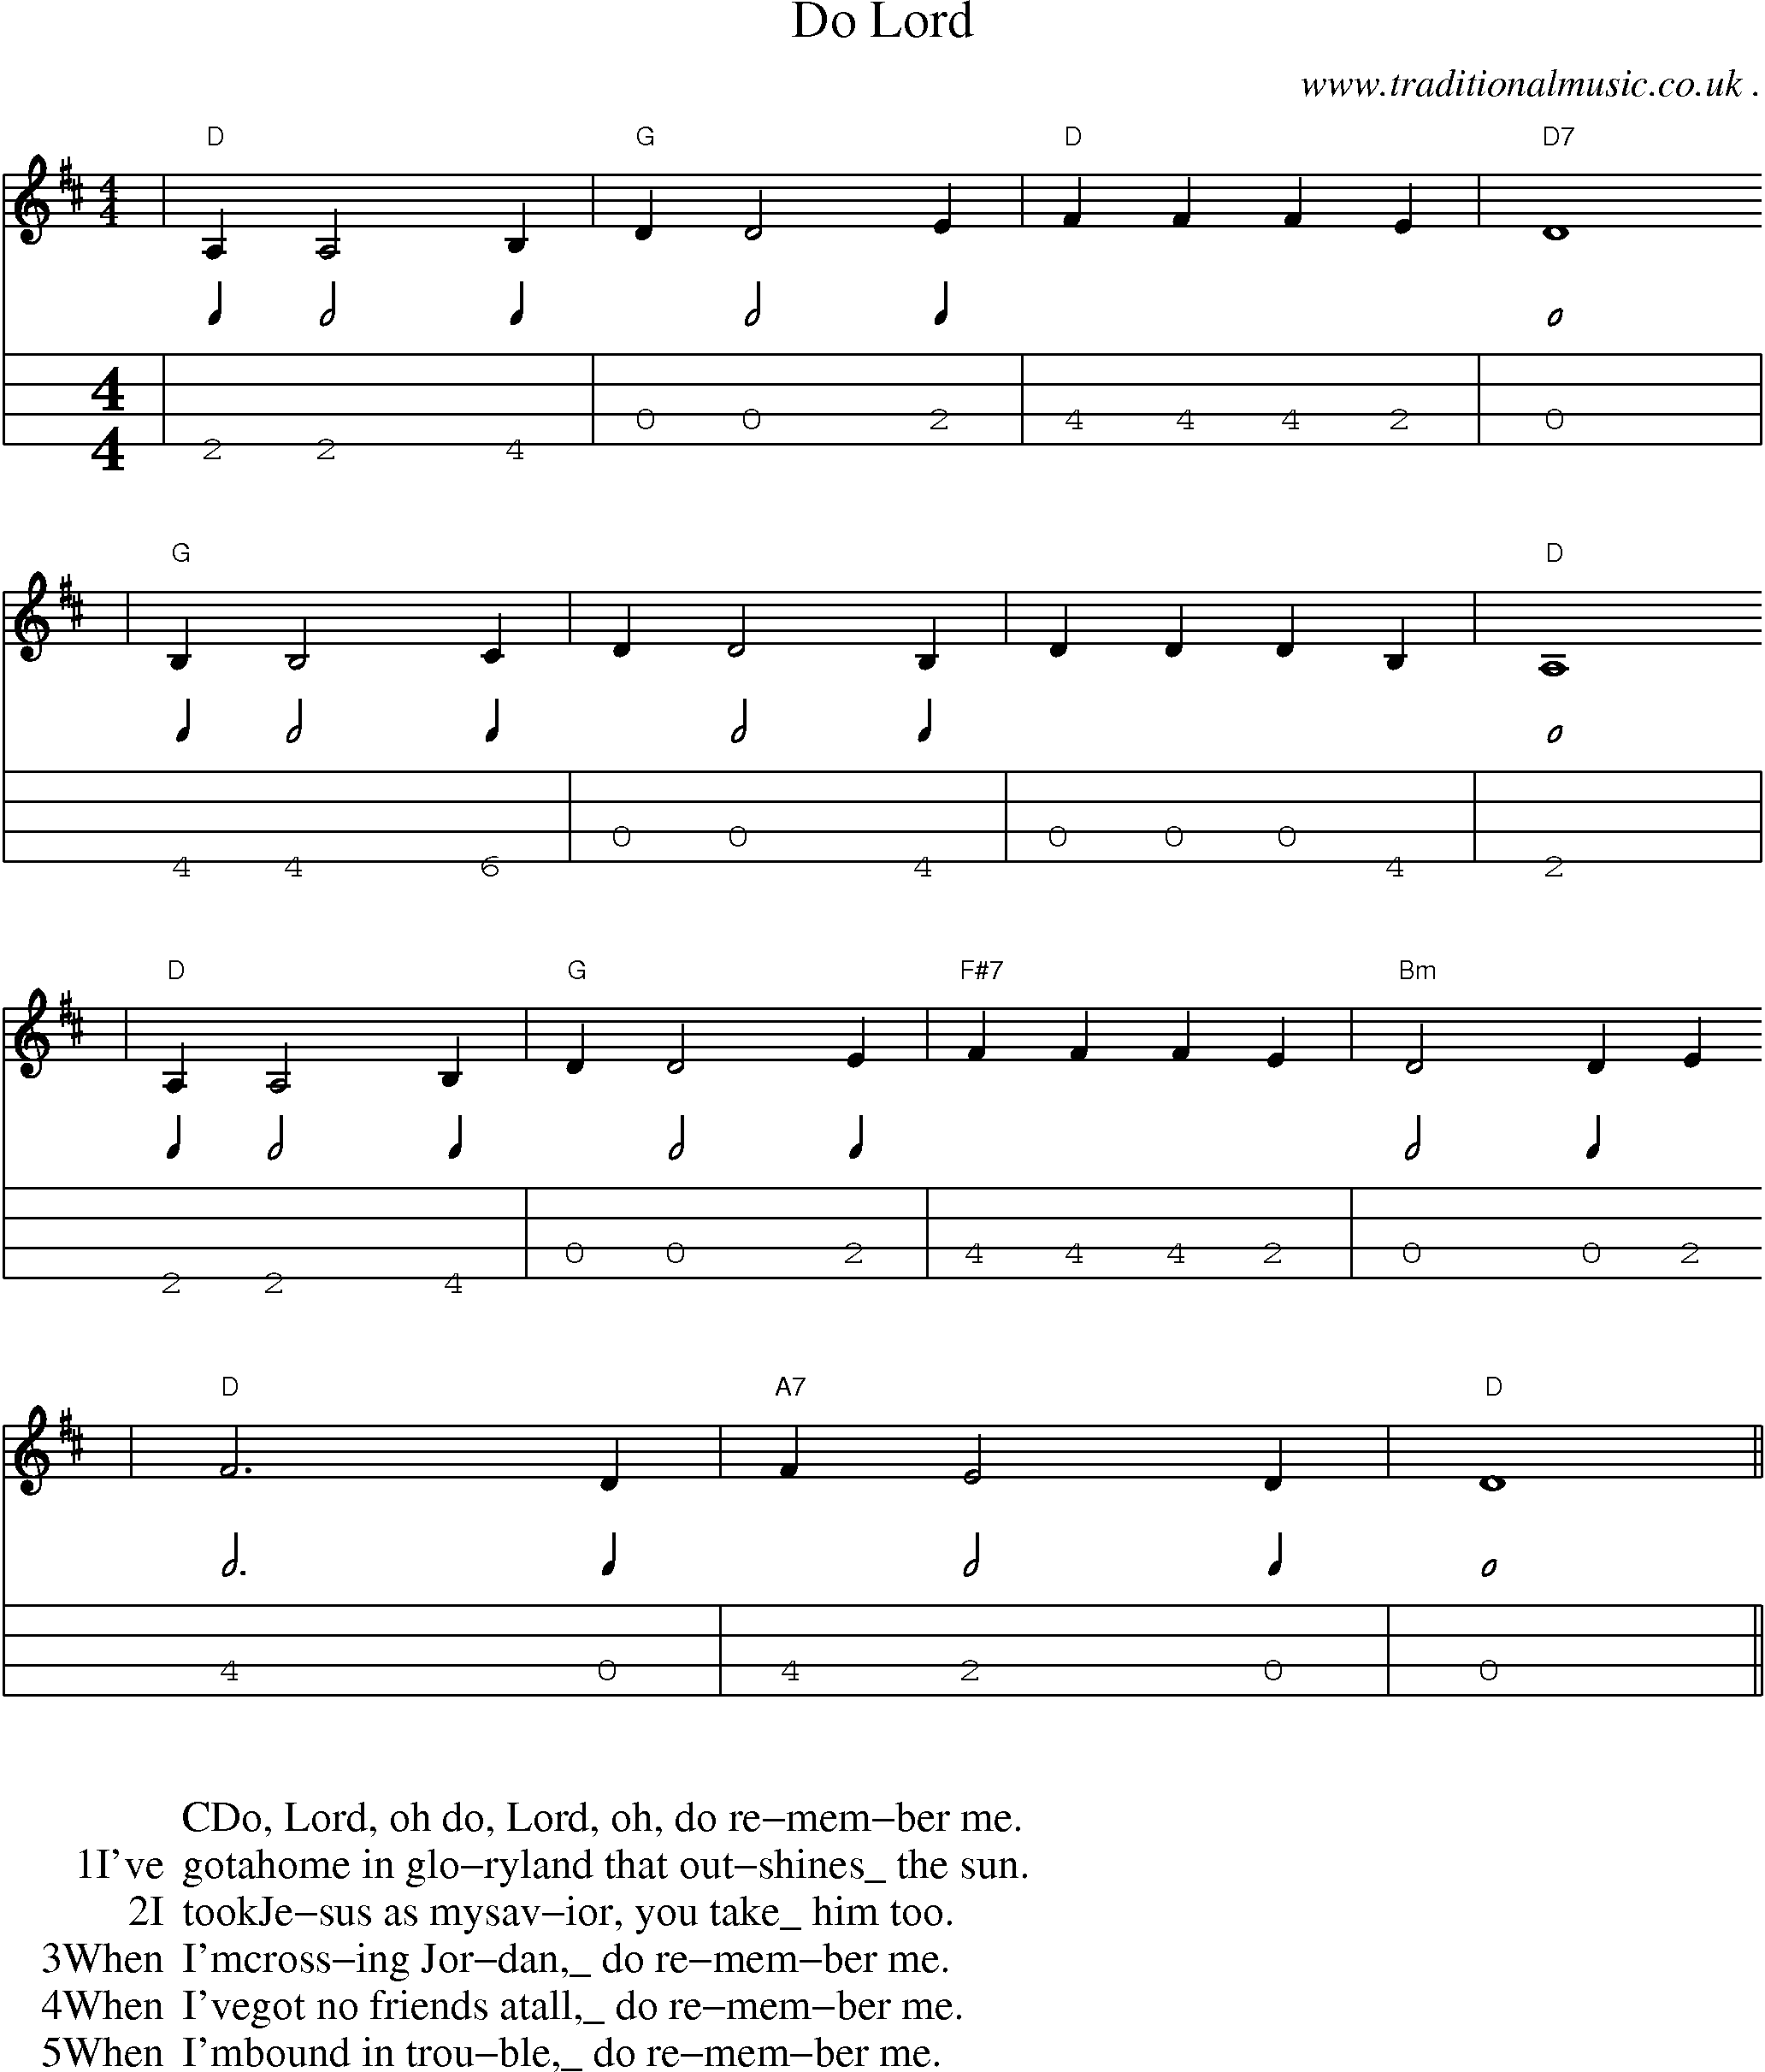 Music Score and Mandolin Tabs for Do Lord